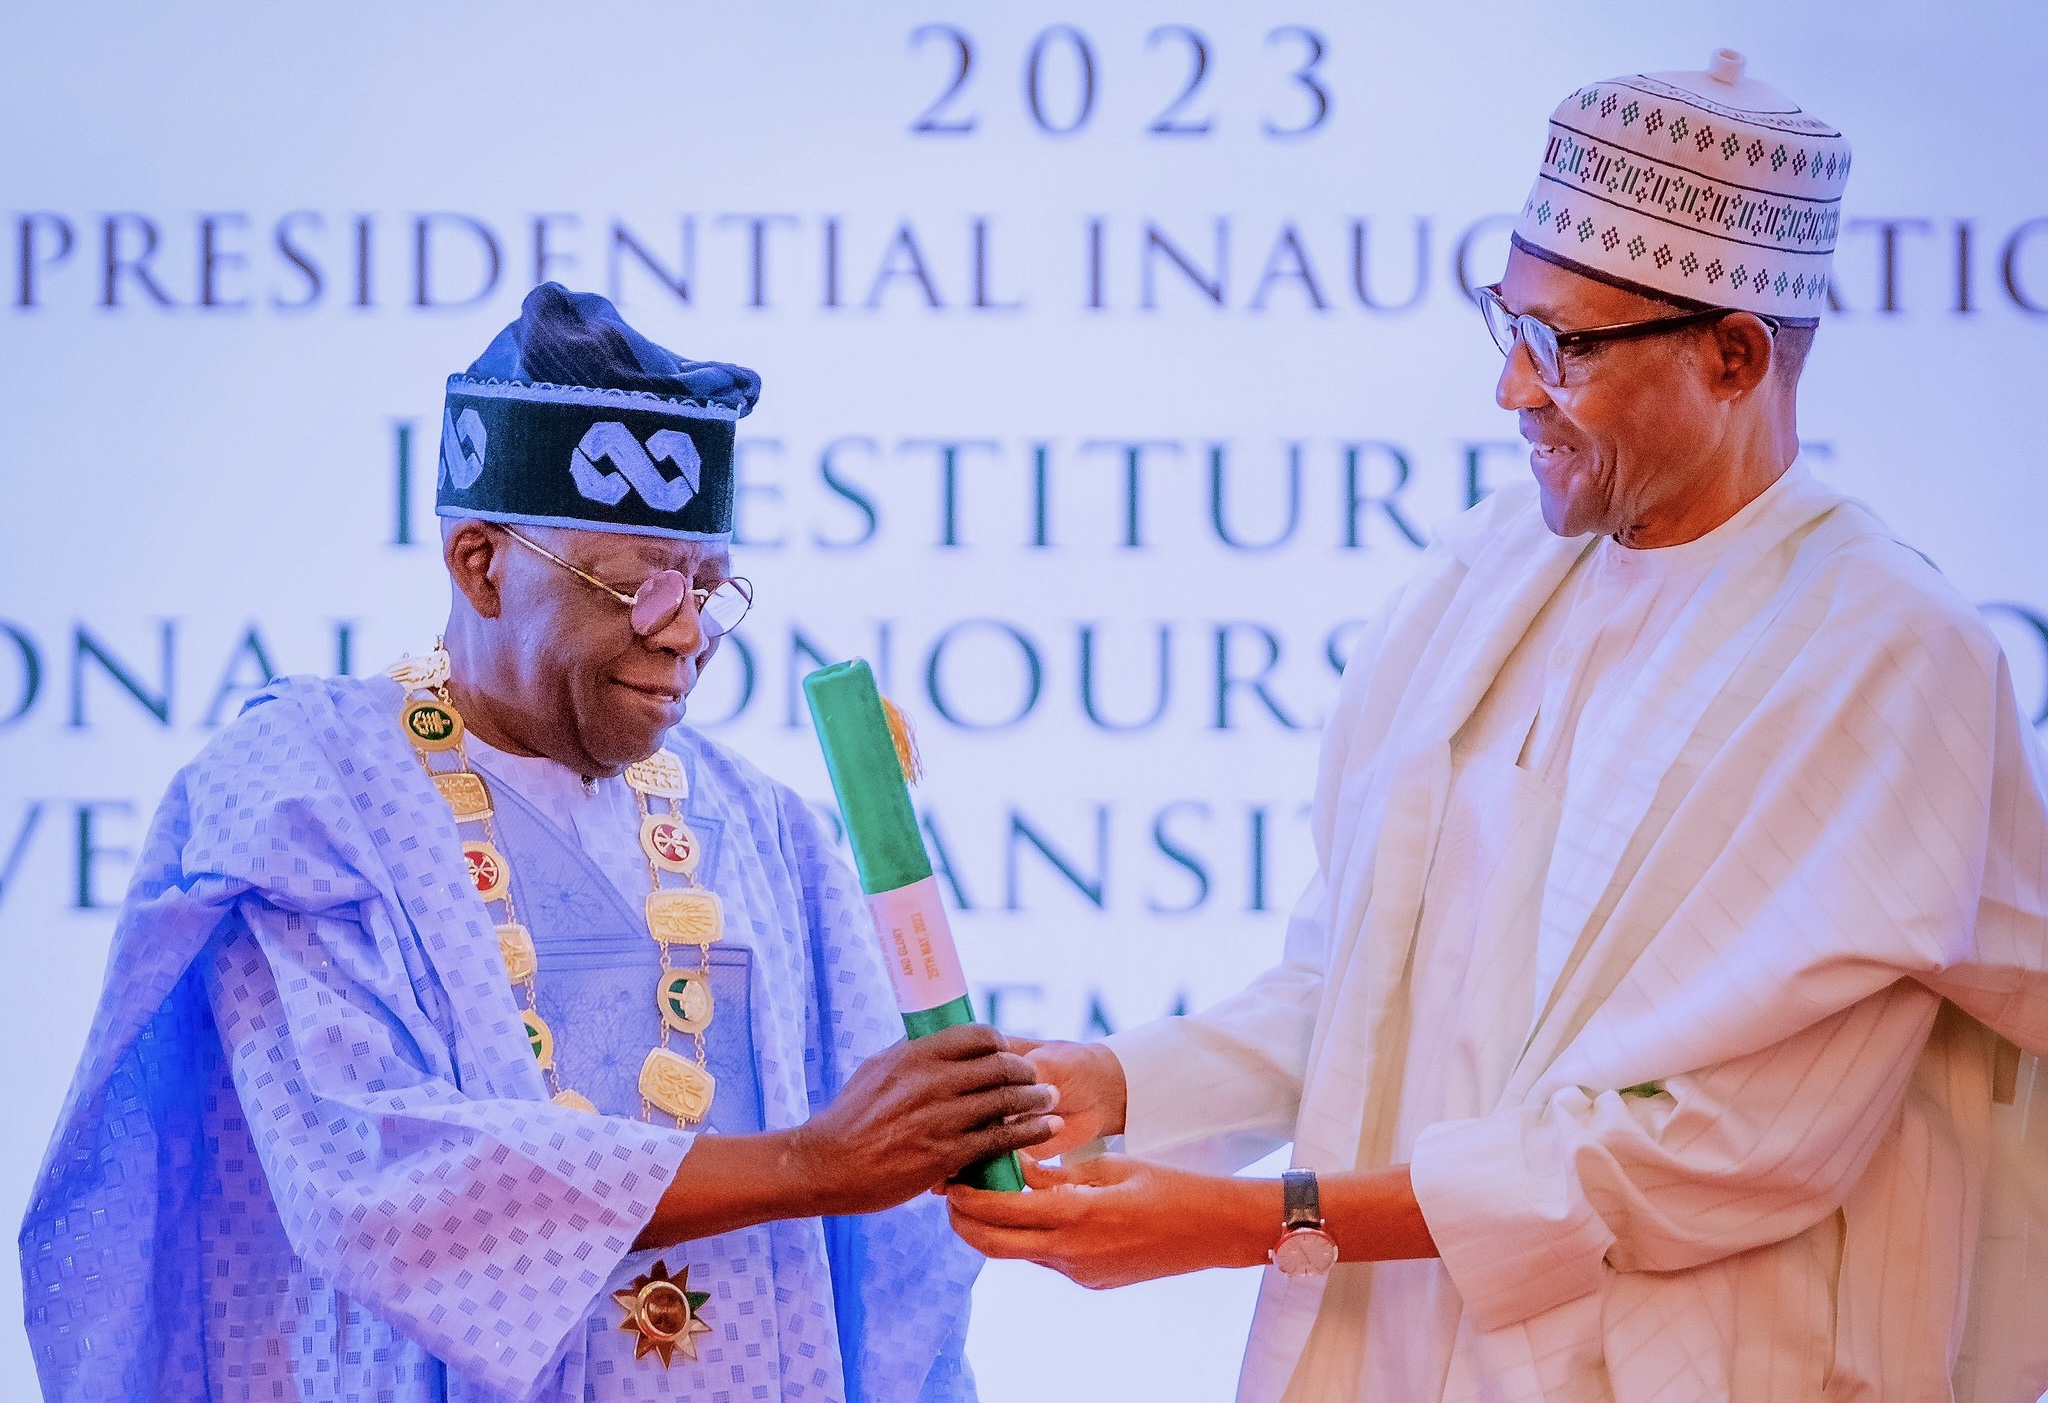 VIDEO: President Tinubu Wobbles, Staggers During Inauguration